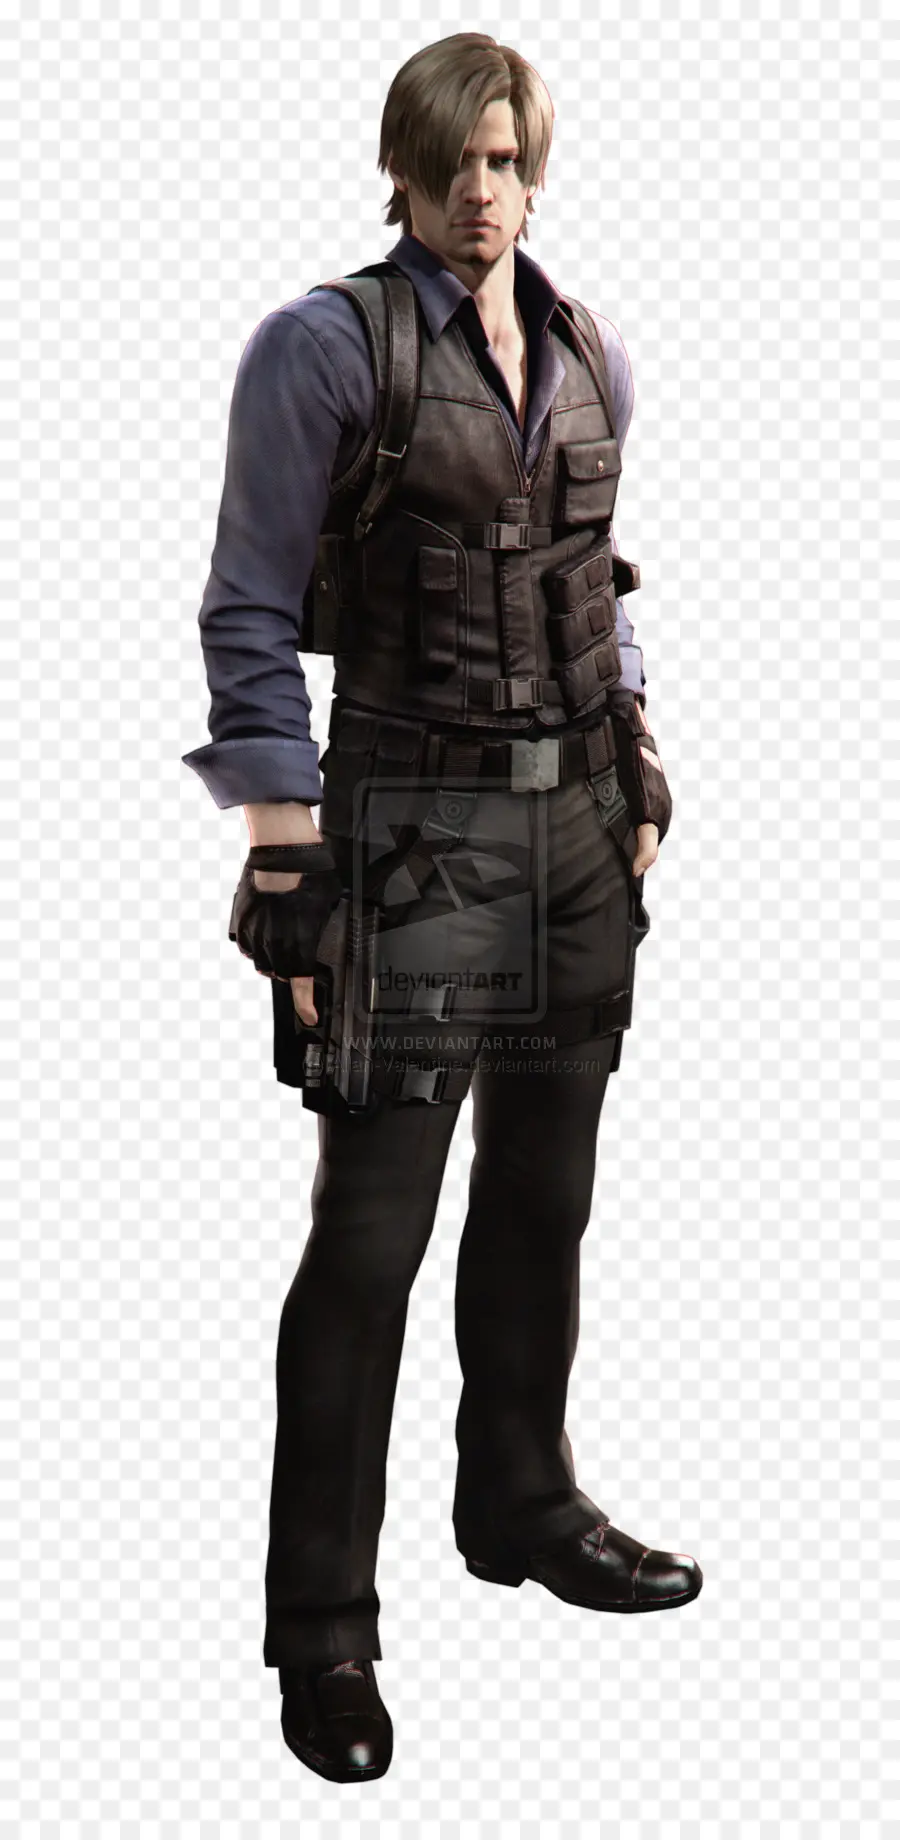 Resident Evil 6，Leon S Kennedy PNG